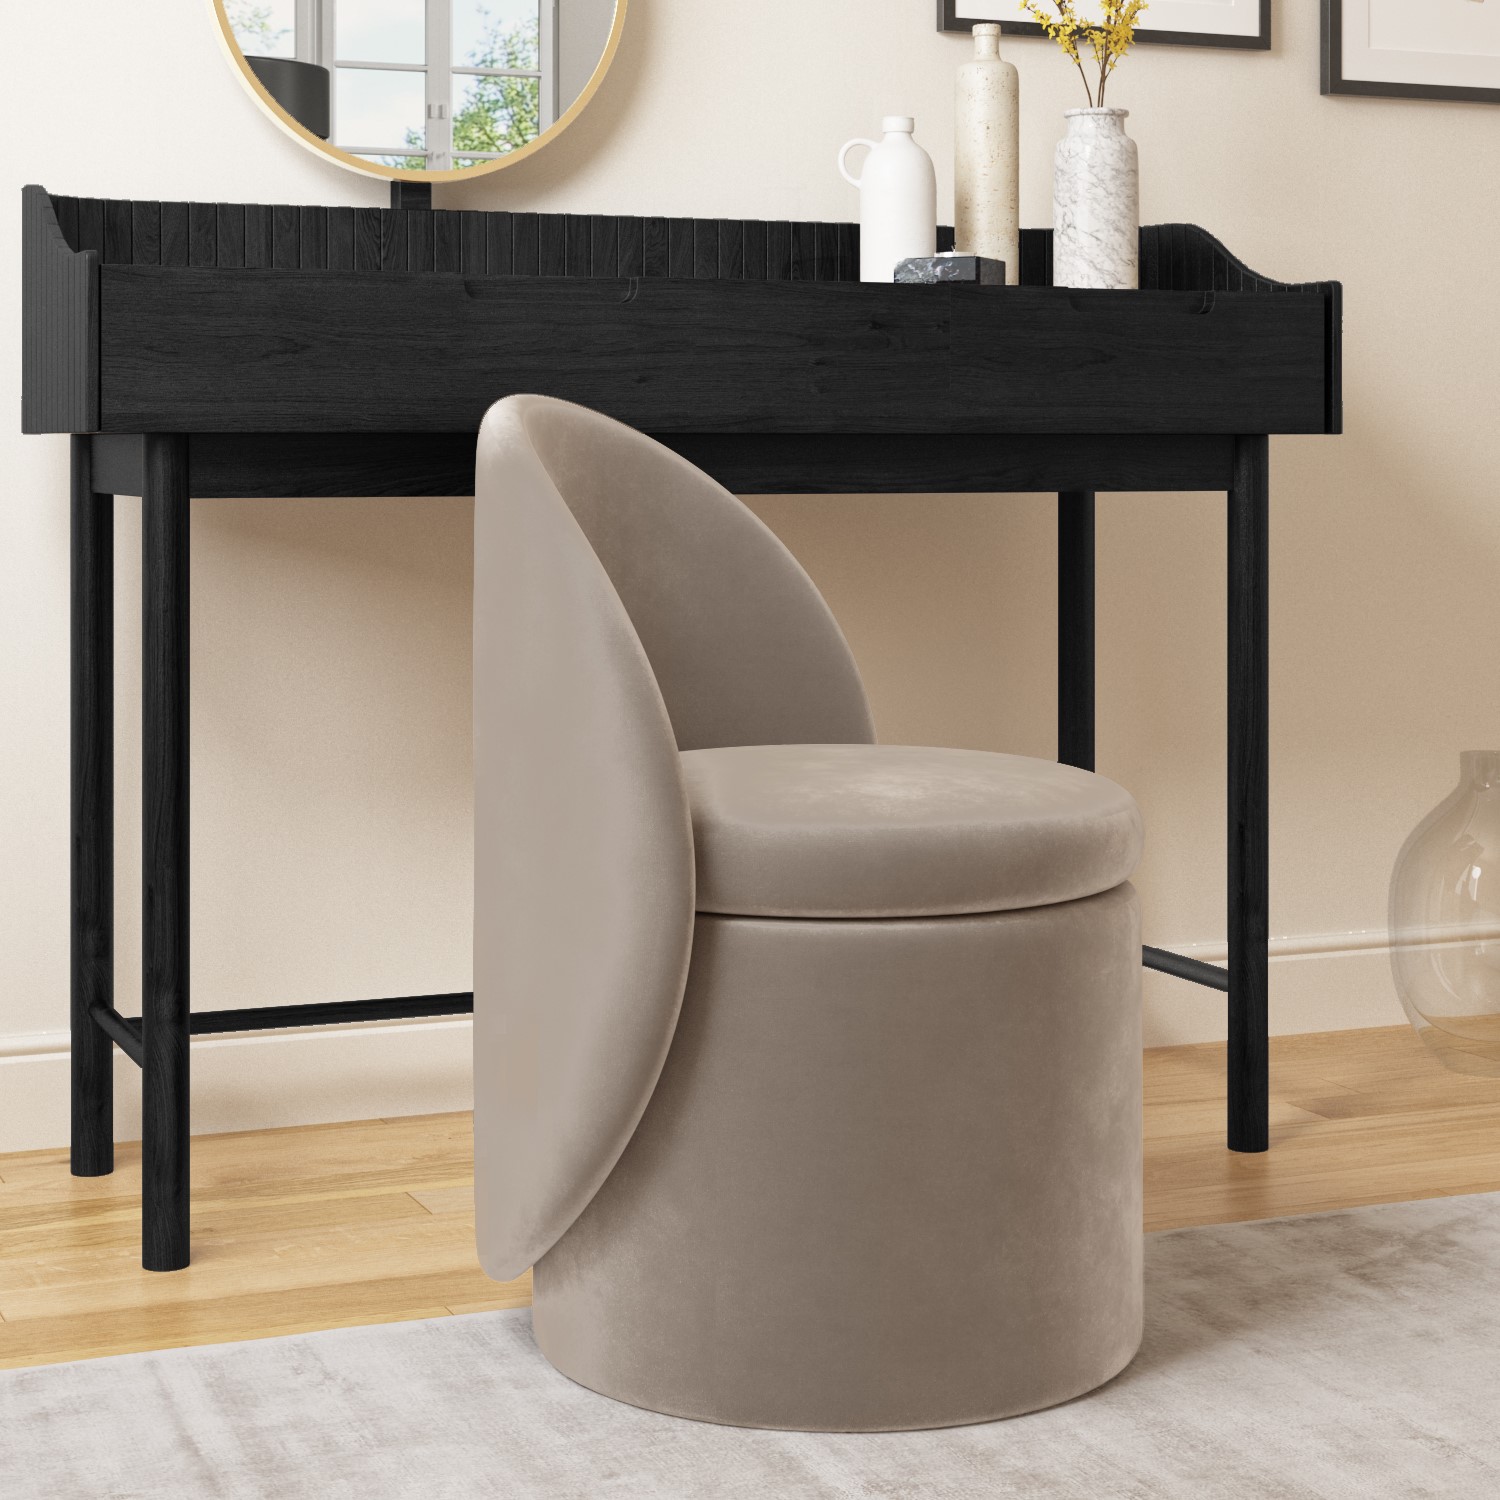 Read more about Mink velvet dressing table chair with ottoman storage leah